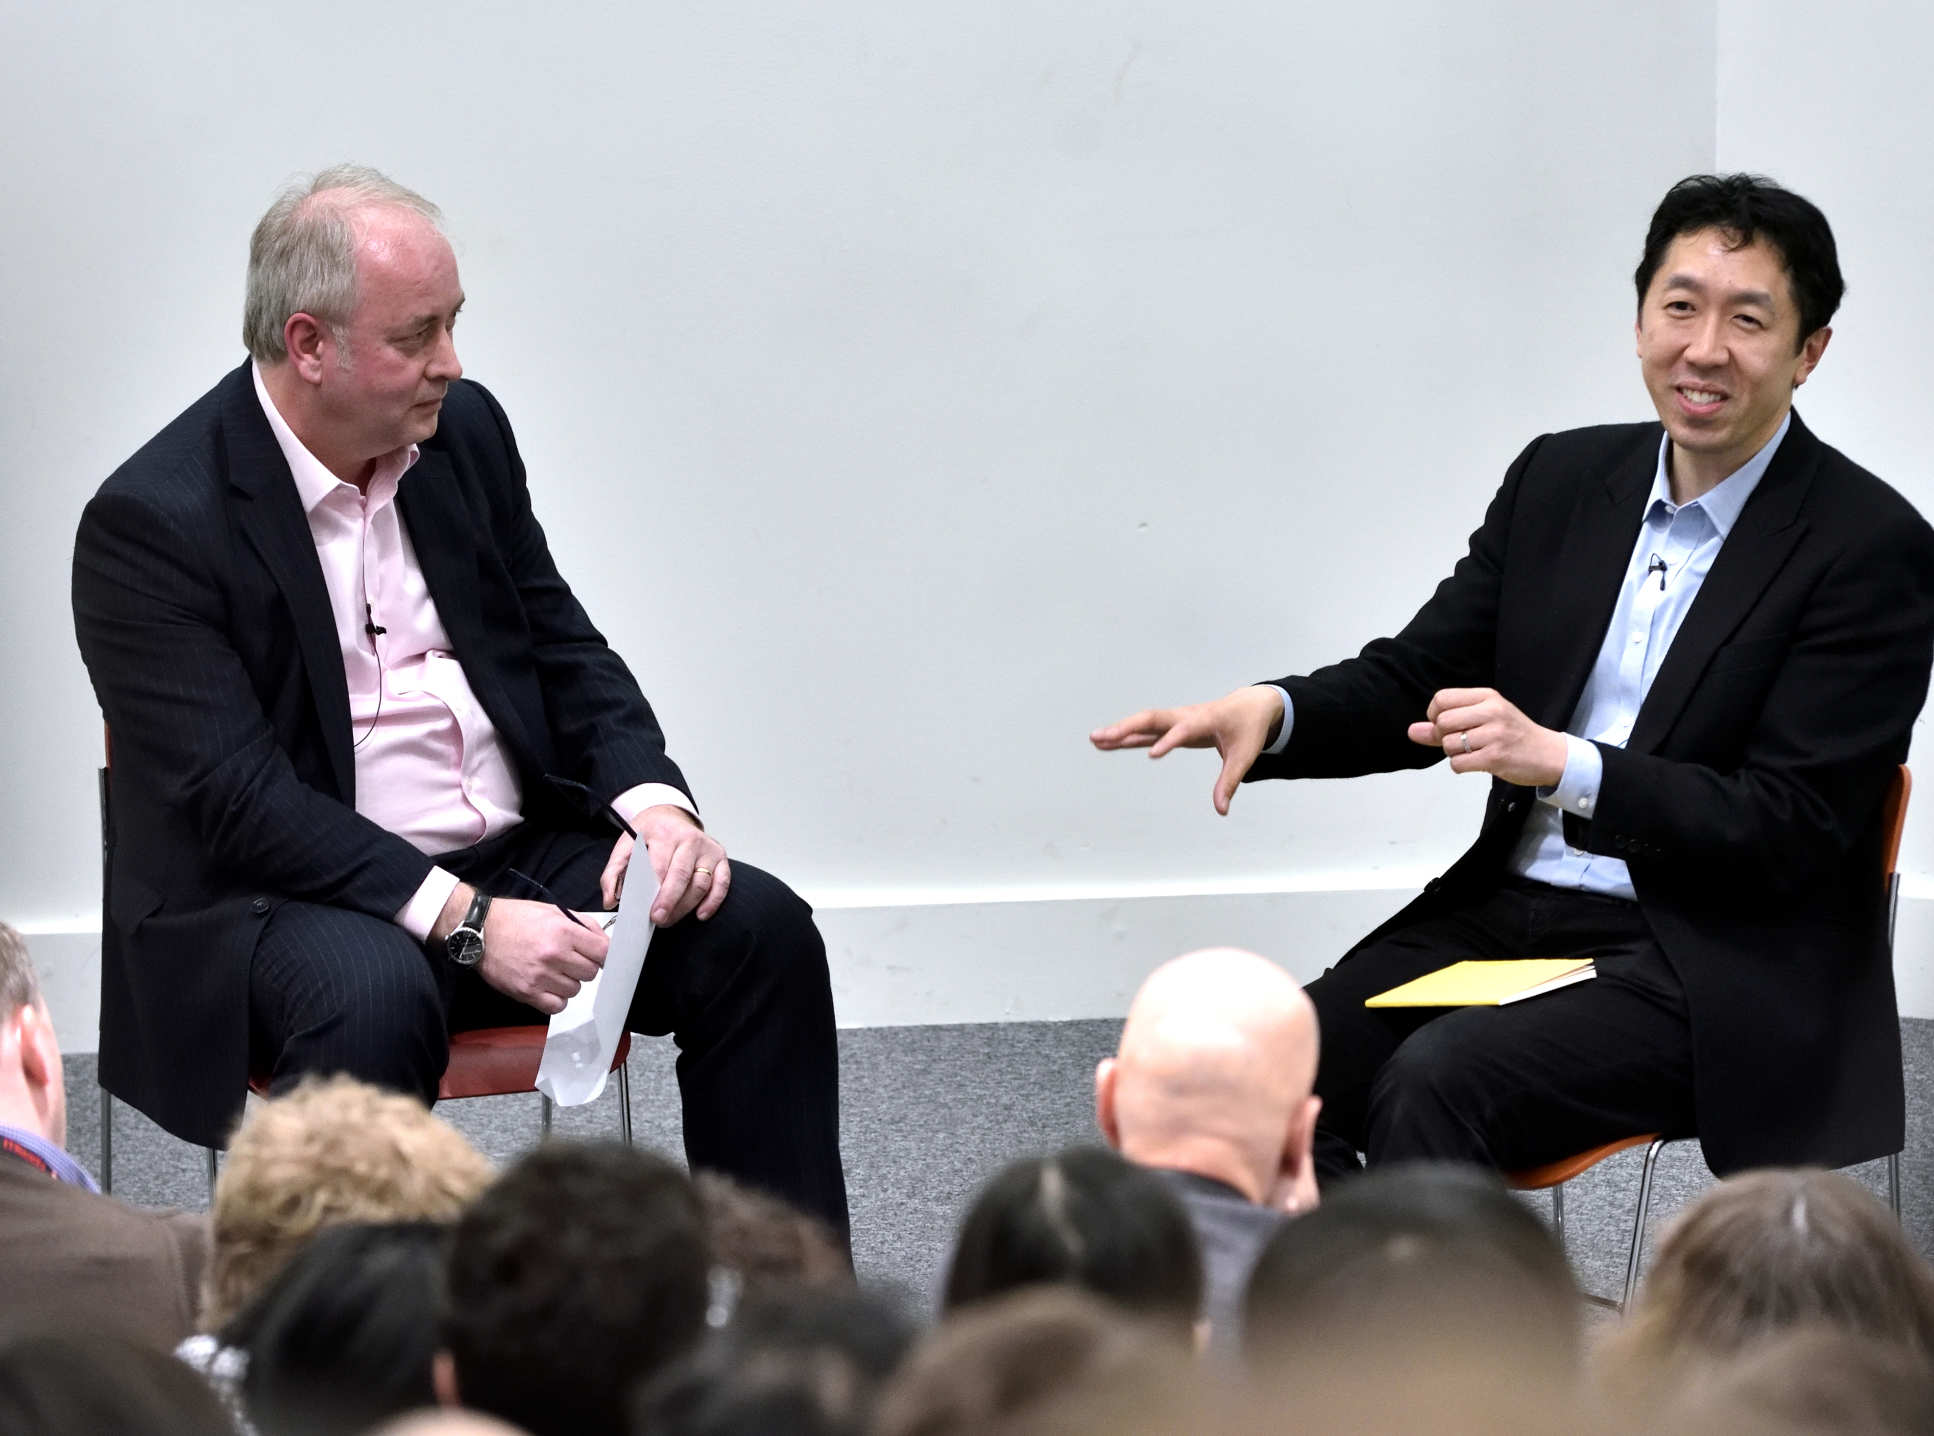 Professor Jennings and Dr Ng in conversation